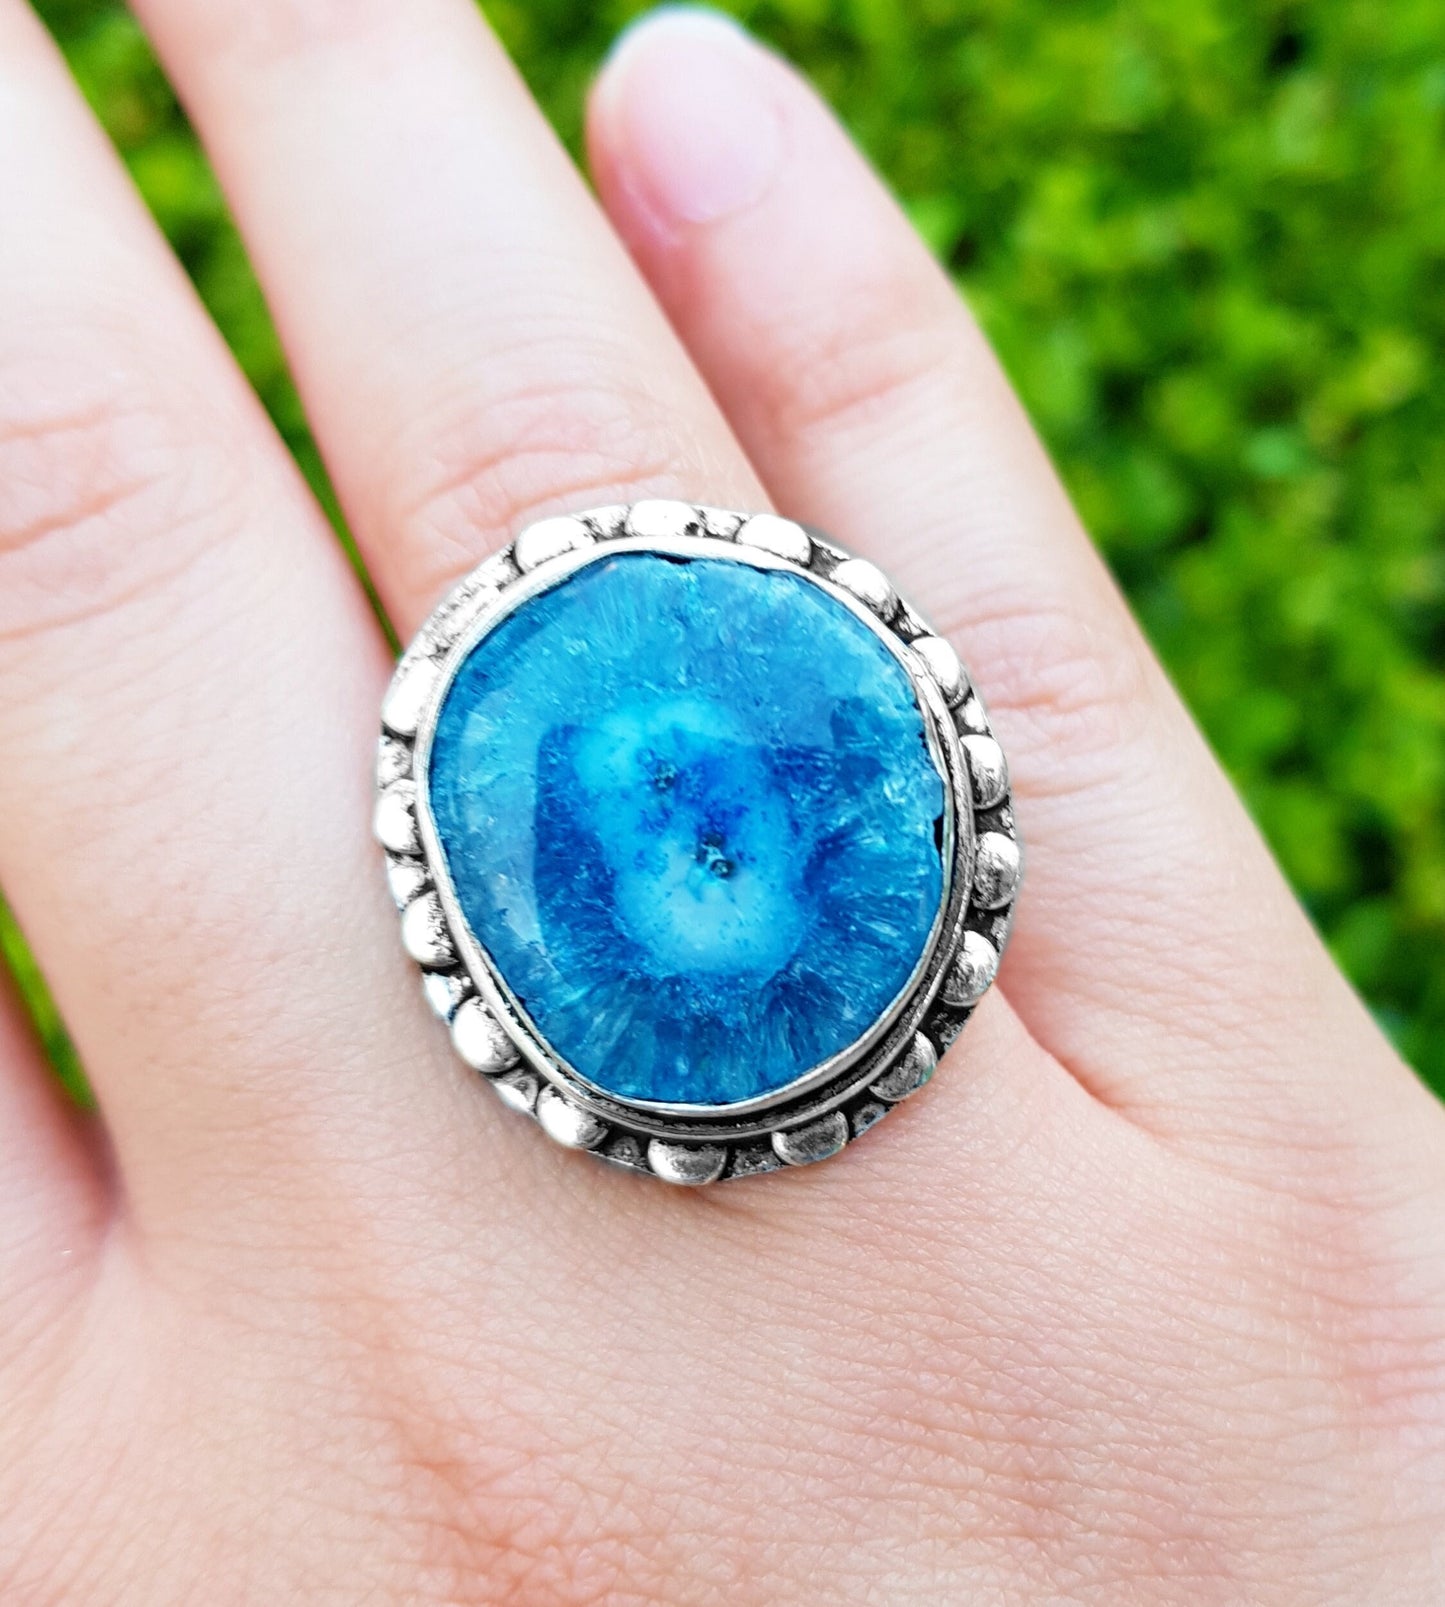 Blue Solar Agate Ring In Sterling Silver Size US 8 1/2 Big Statement Ring Boho Rings Raw Gemstone Ring Unique Gift For Her